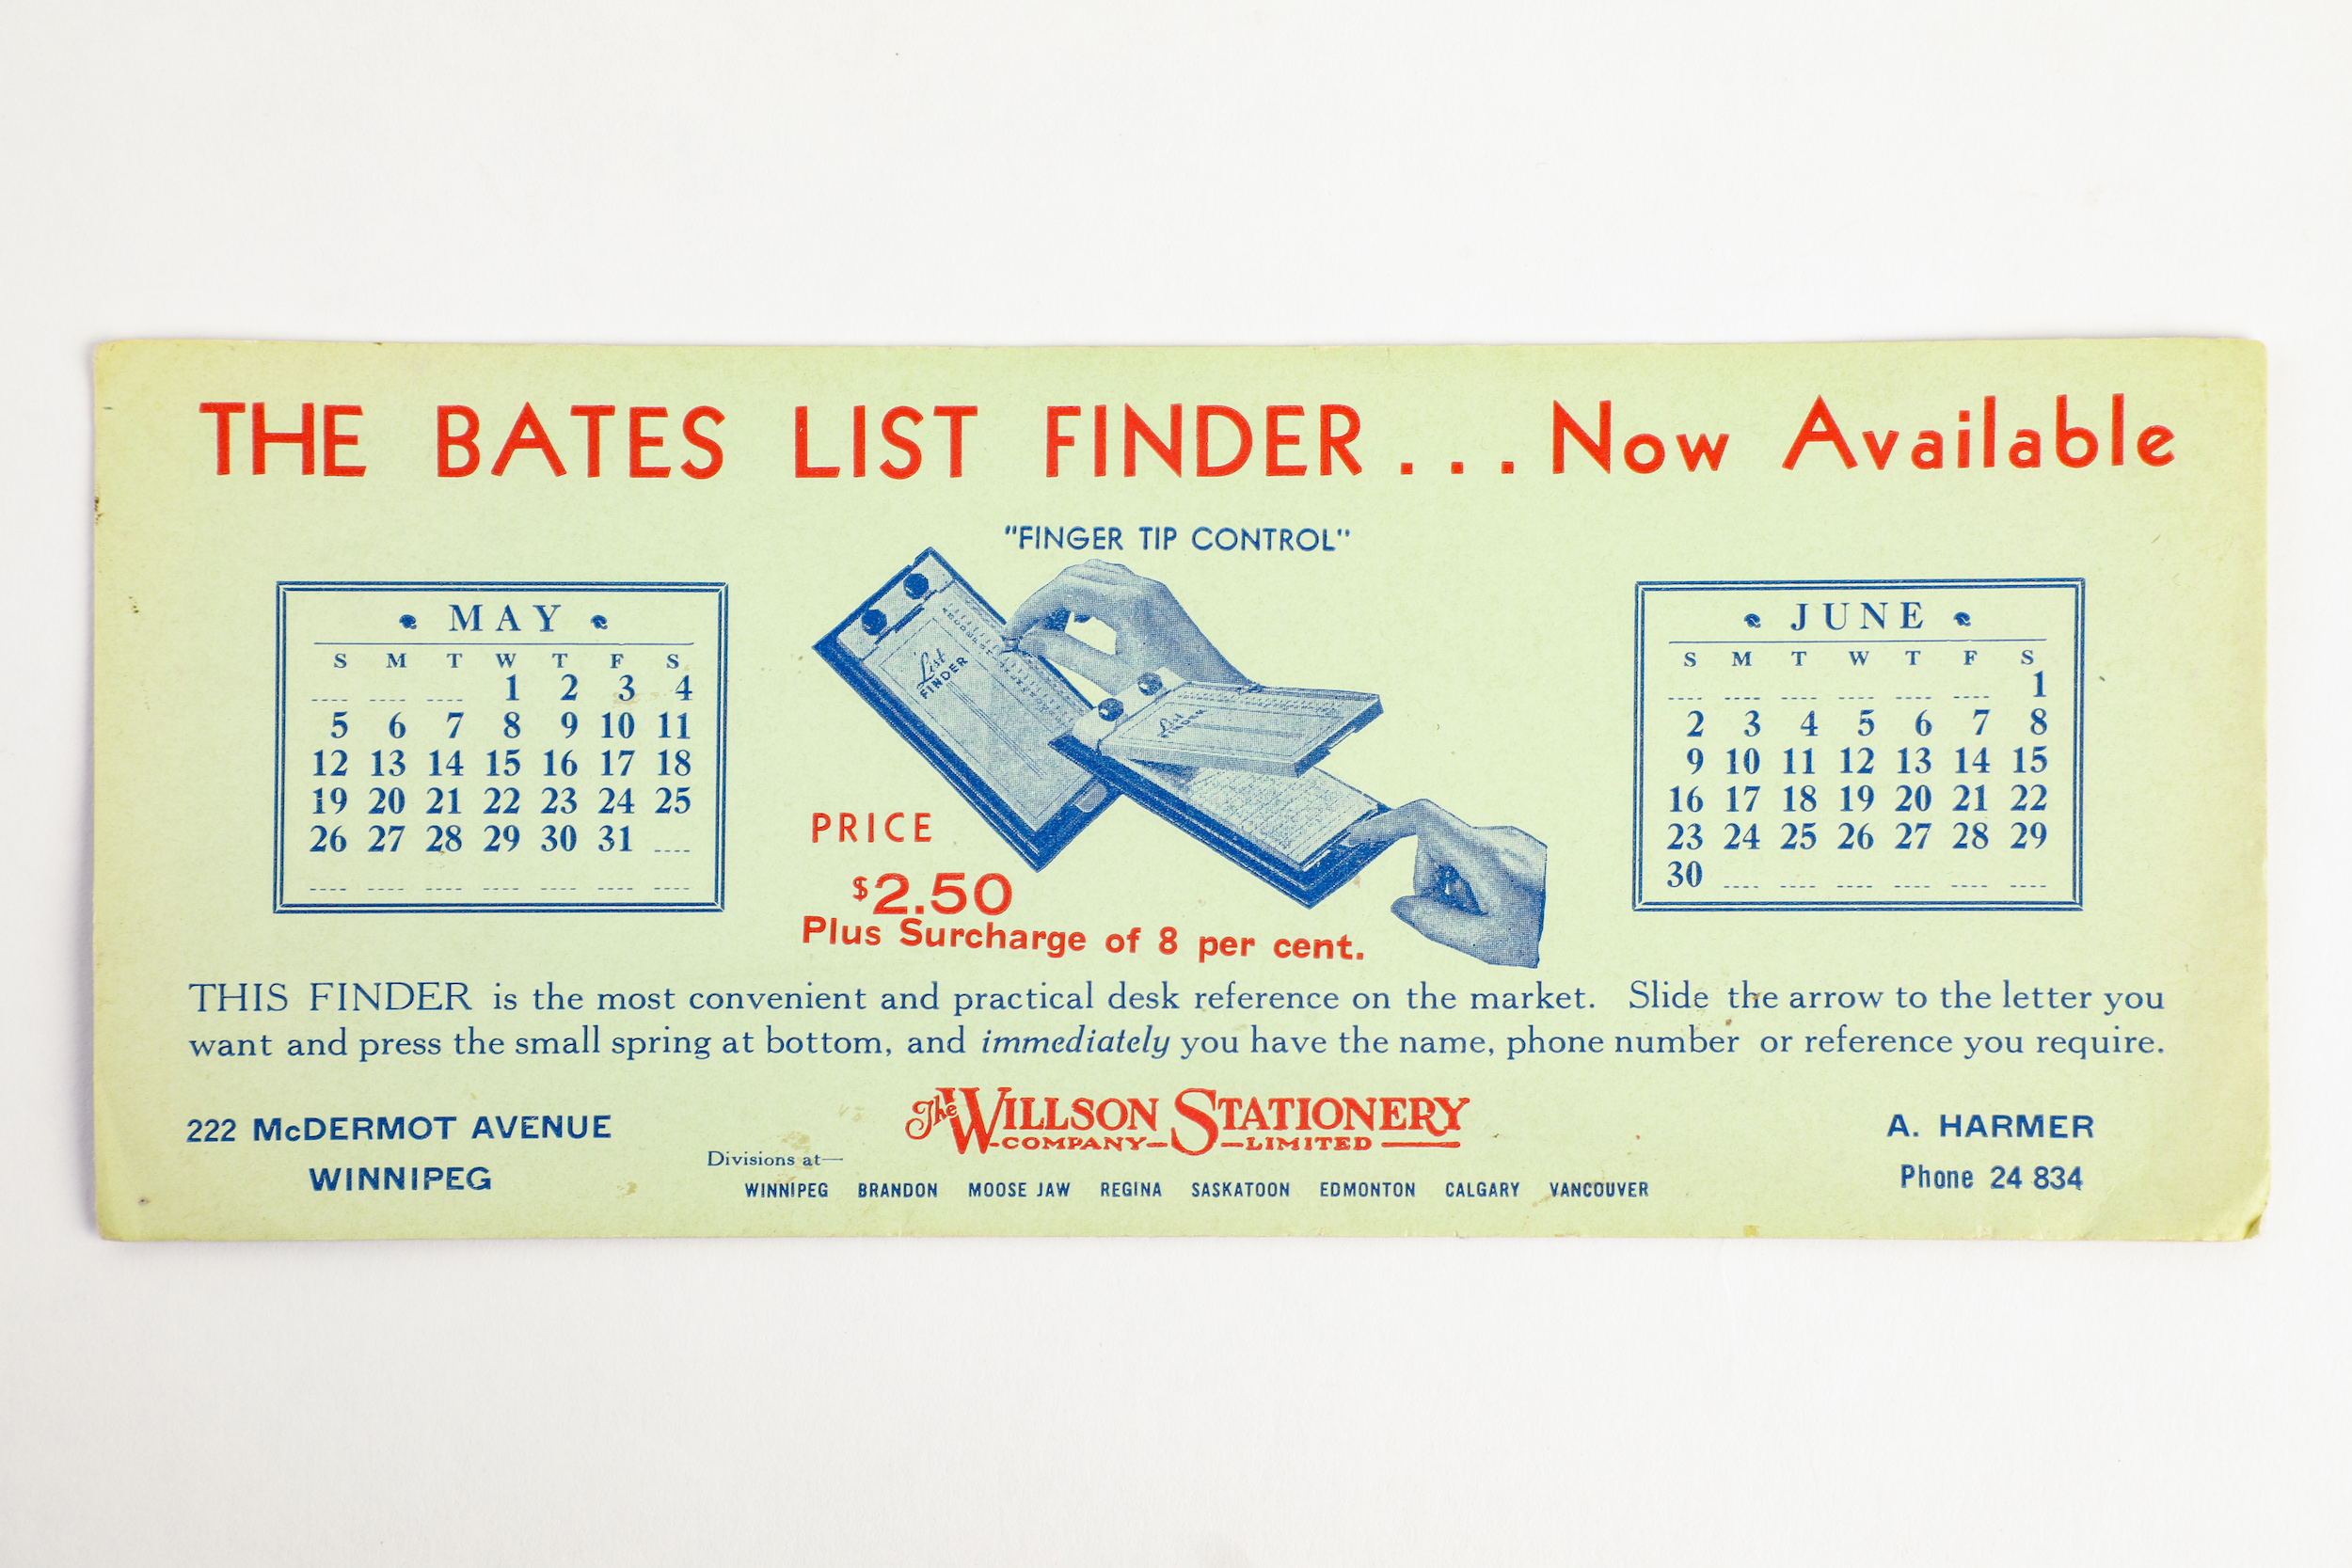 Advertisement for the Bates List Finder sold by Willson Stationary, formerly located at 222 McDermot Avenue